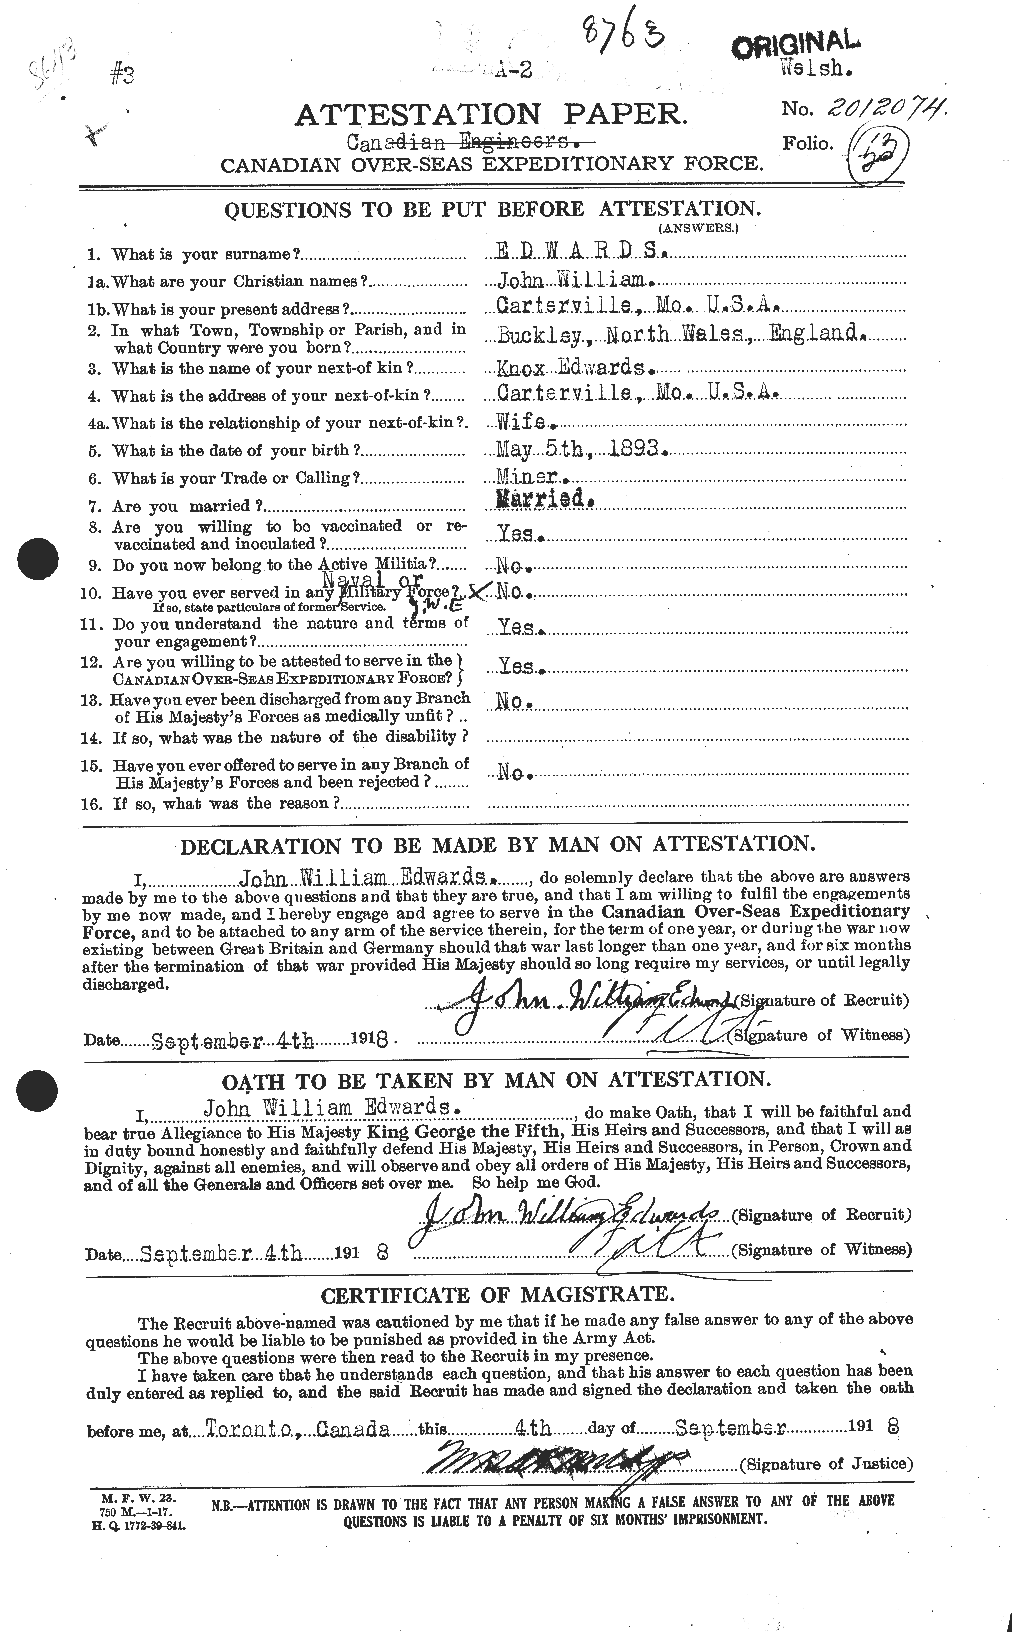 Personnel Records of the First World War - CEF 310161a